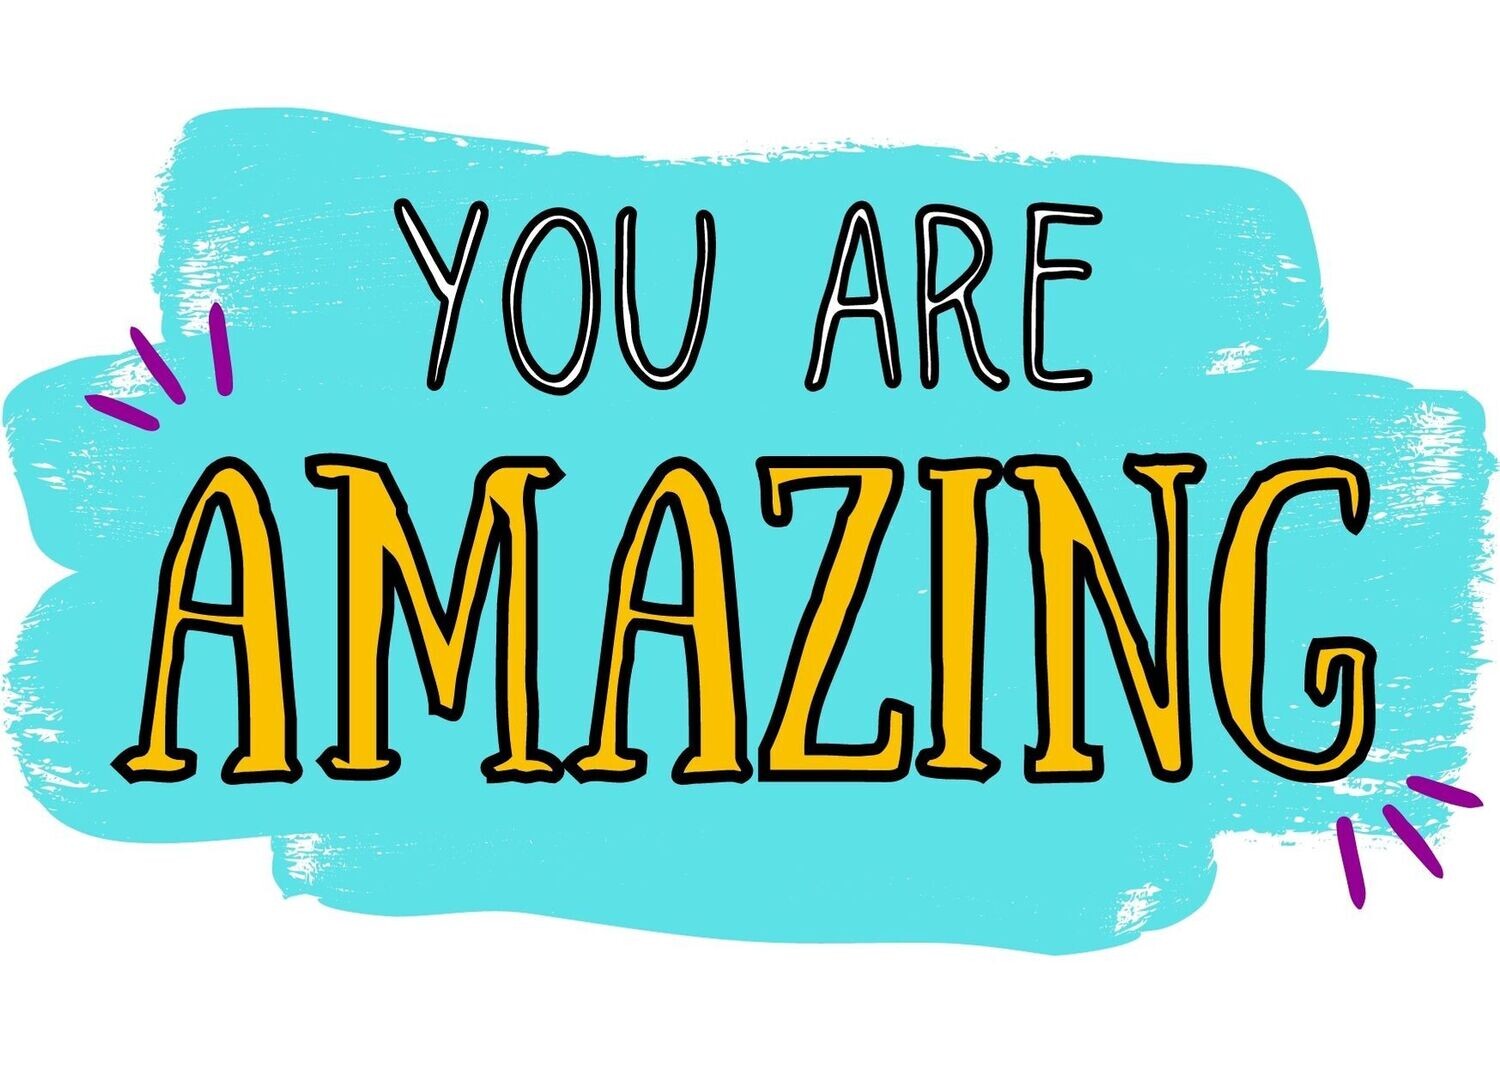 You are AMAZING!